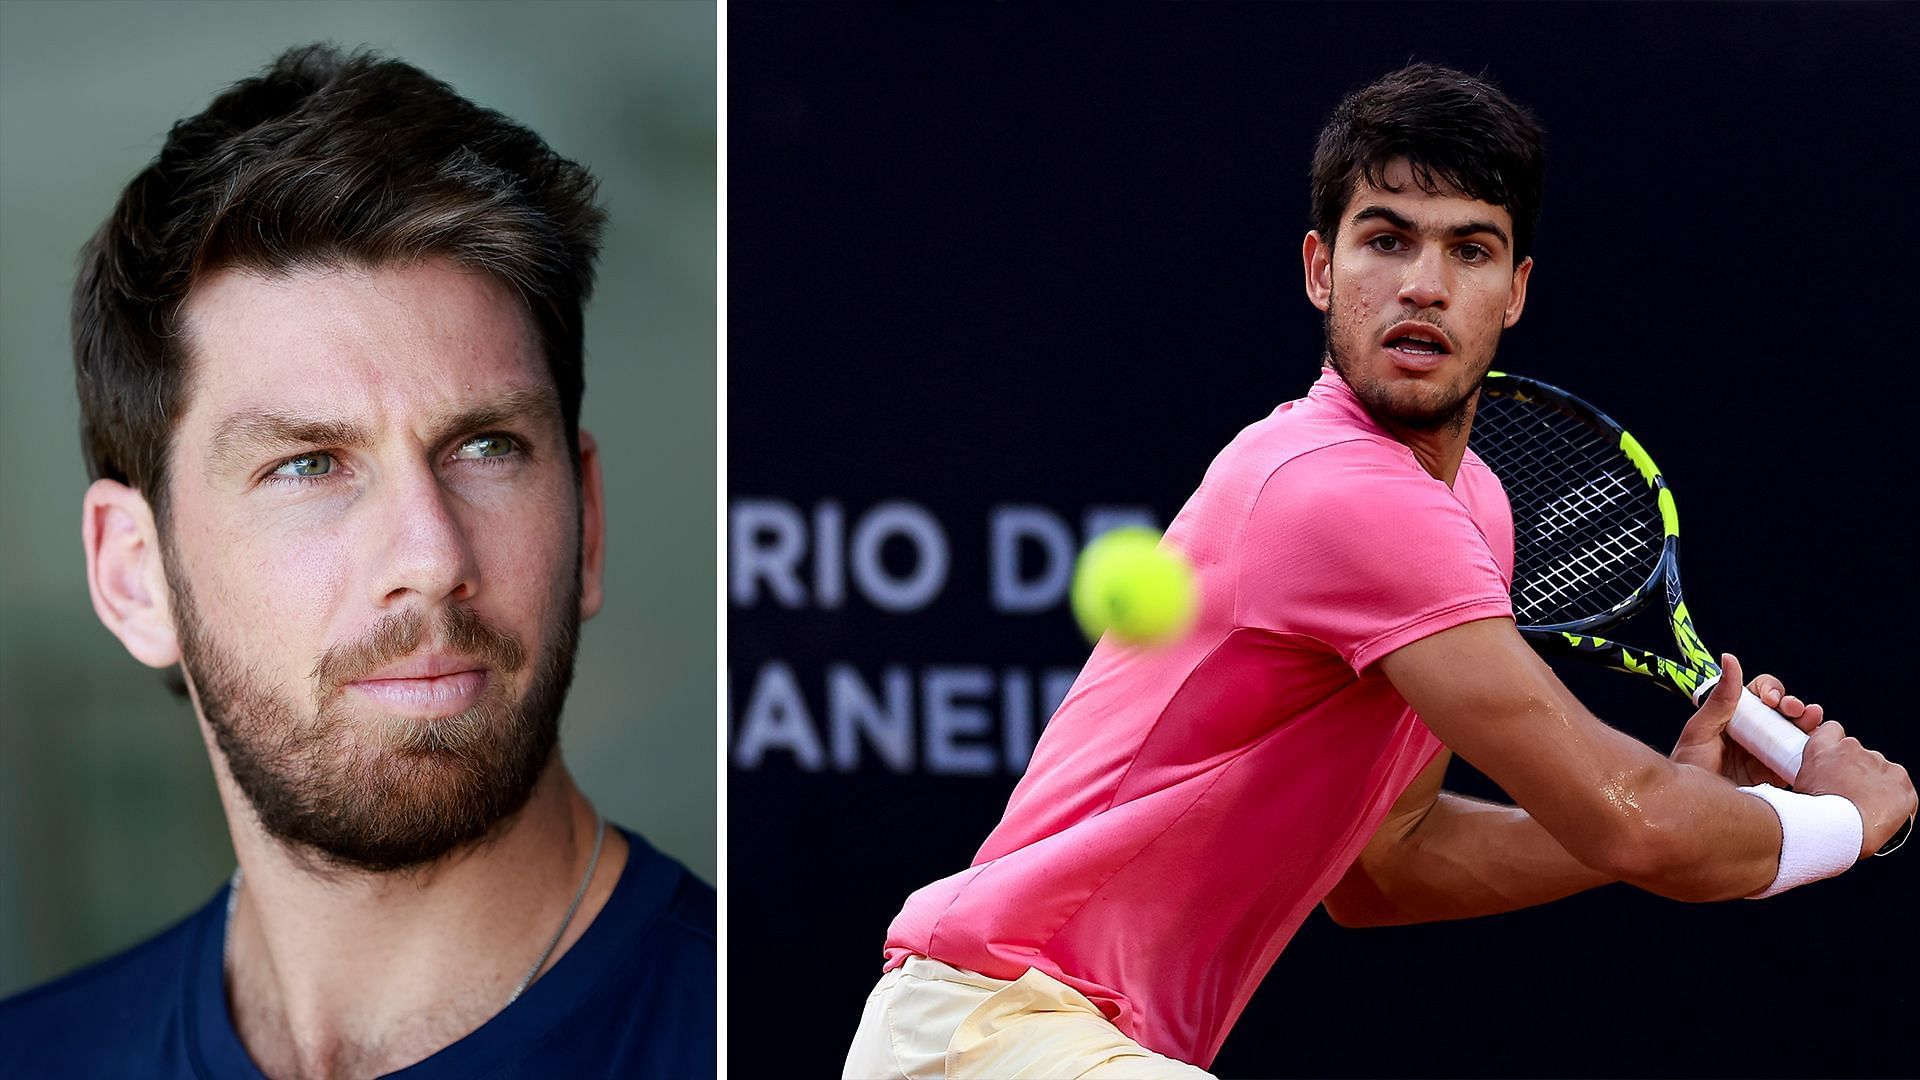 Cameron Norrie comments on Carlos Alcaraz